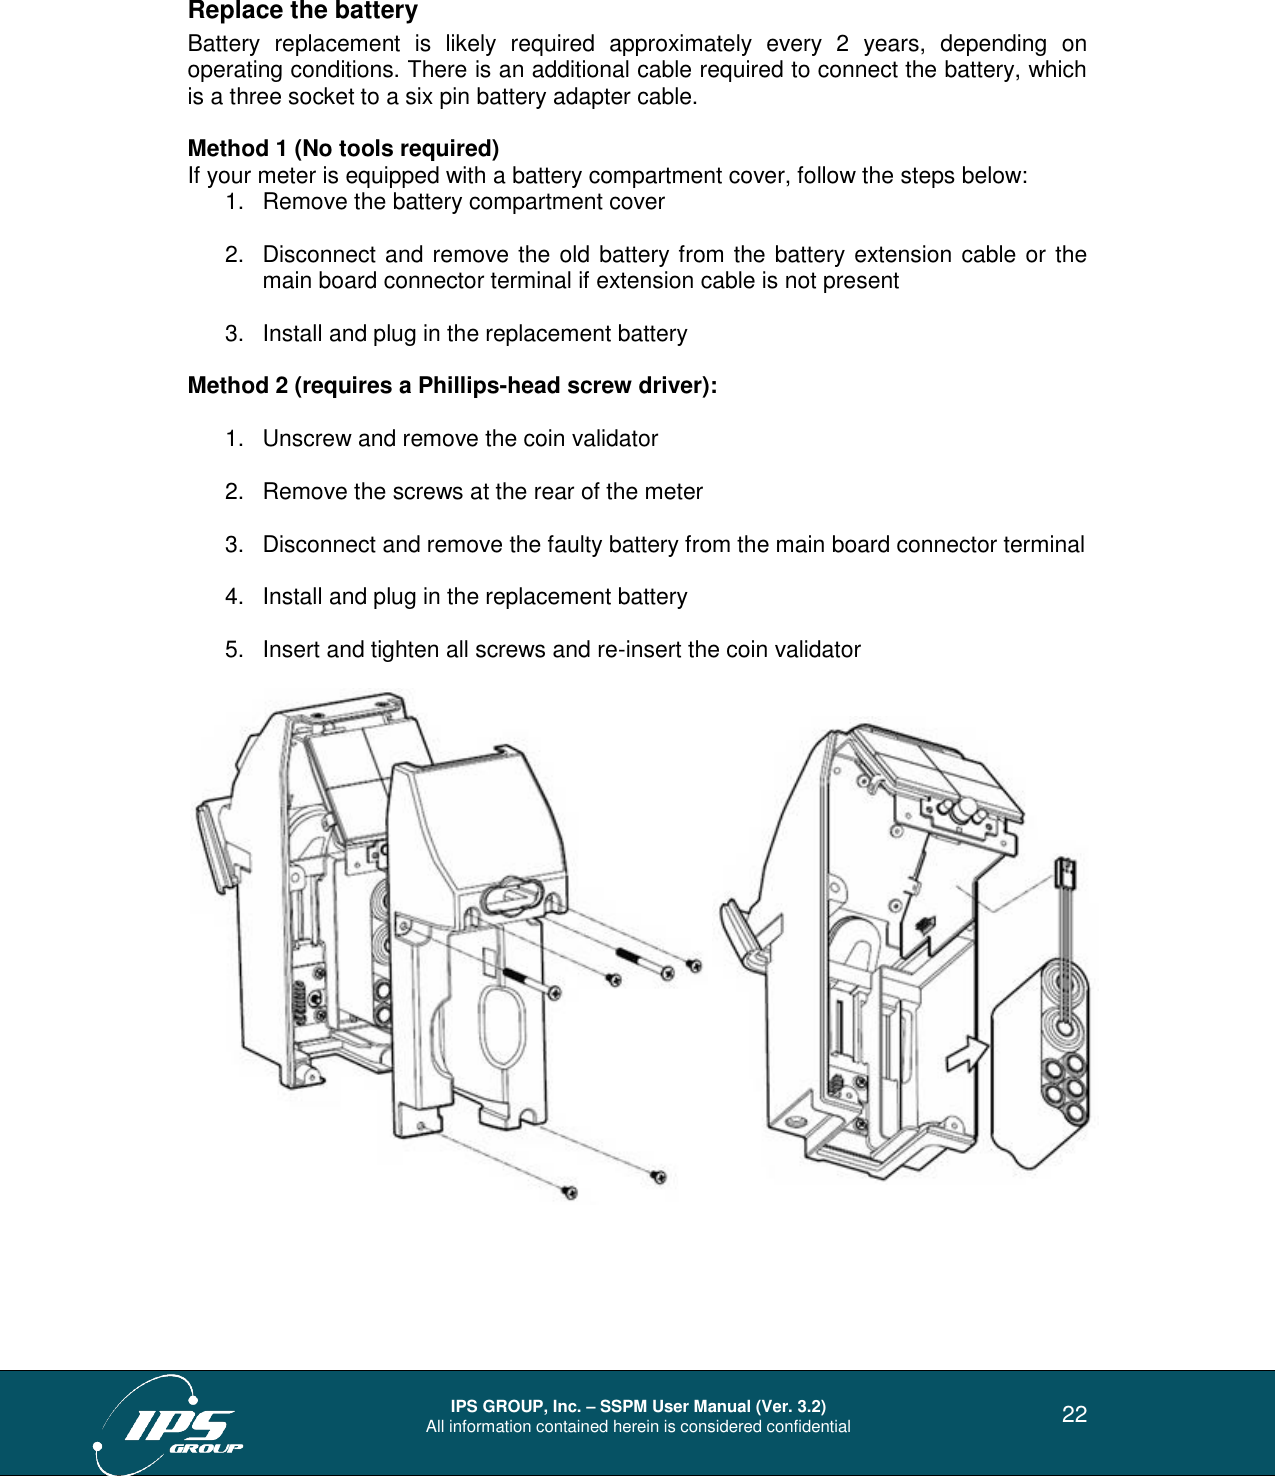  IPS GROUP, Inc. – SSPM User Manual (Ver. 3.2) All information contained herein is considered confidential   22 Replace the battery Battery  replacement  is  likely  required  approximately  every  2  years,  depending  on operating conditions. There is an additional cable required to connect the battery, which is a three socket to a six pin battery adapter cable.     Method 1 (No tools required) If your meter is equipped with a battery compartment cover, follow the steps below: 1.  Remove the battery compartment cover  2.  Disconnect and remove the old battery from the battery extension cable or the main board connector terminal if extension cable is not present  3.  Install and plug in the replacement battery  Method 2 (requires a Phillips-head screw driver):  1.  Unscrew and remove the coin validator  2.  Remove the screws at the rear of the meter  3.  Disconnect and remove the faulty battery from the main board connector terminal  4.  Install and plug in the replacement battery  5.  Insert and tighten all screws and re-insert the coin validator       